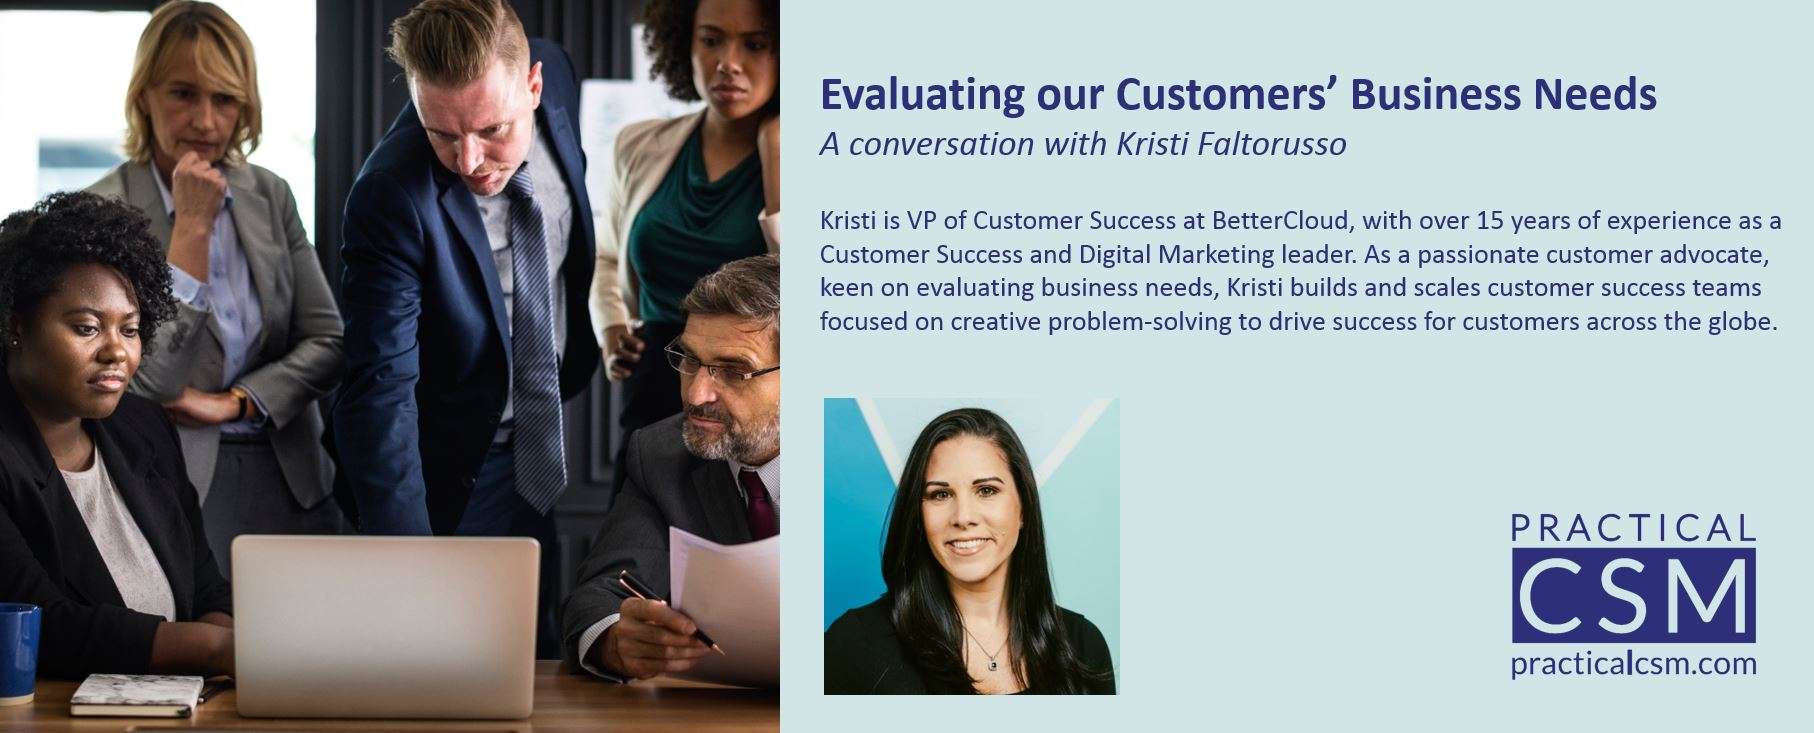 Evaluating our Customer's Business Needs with Kristi Faltorusso - Practical CSM